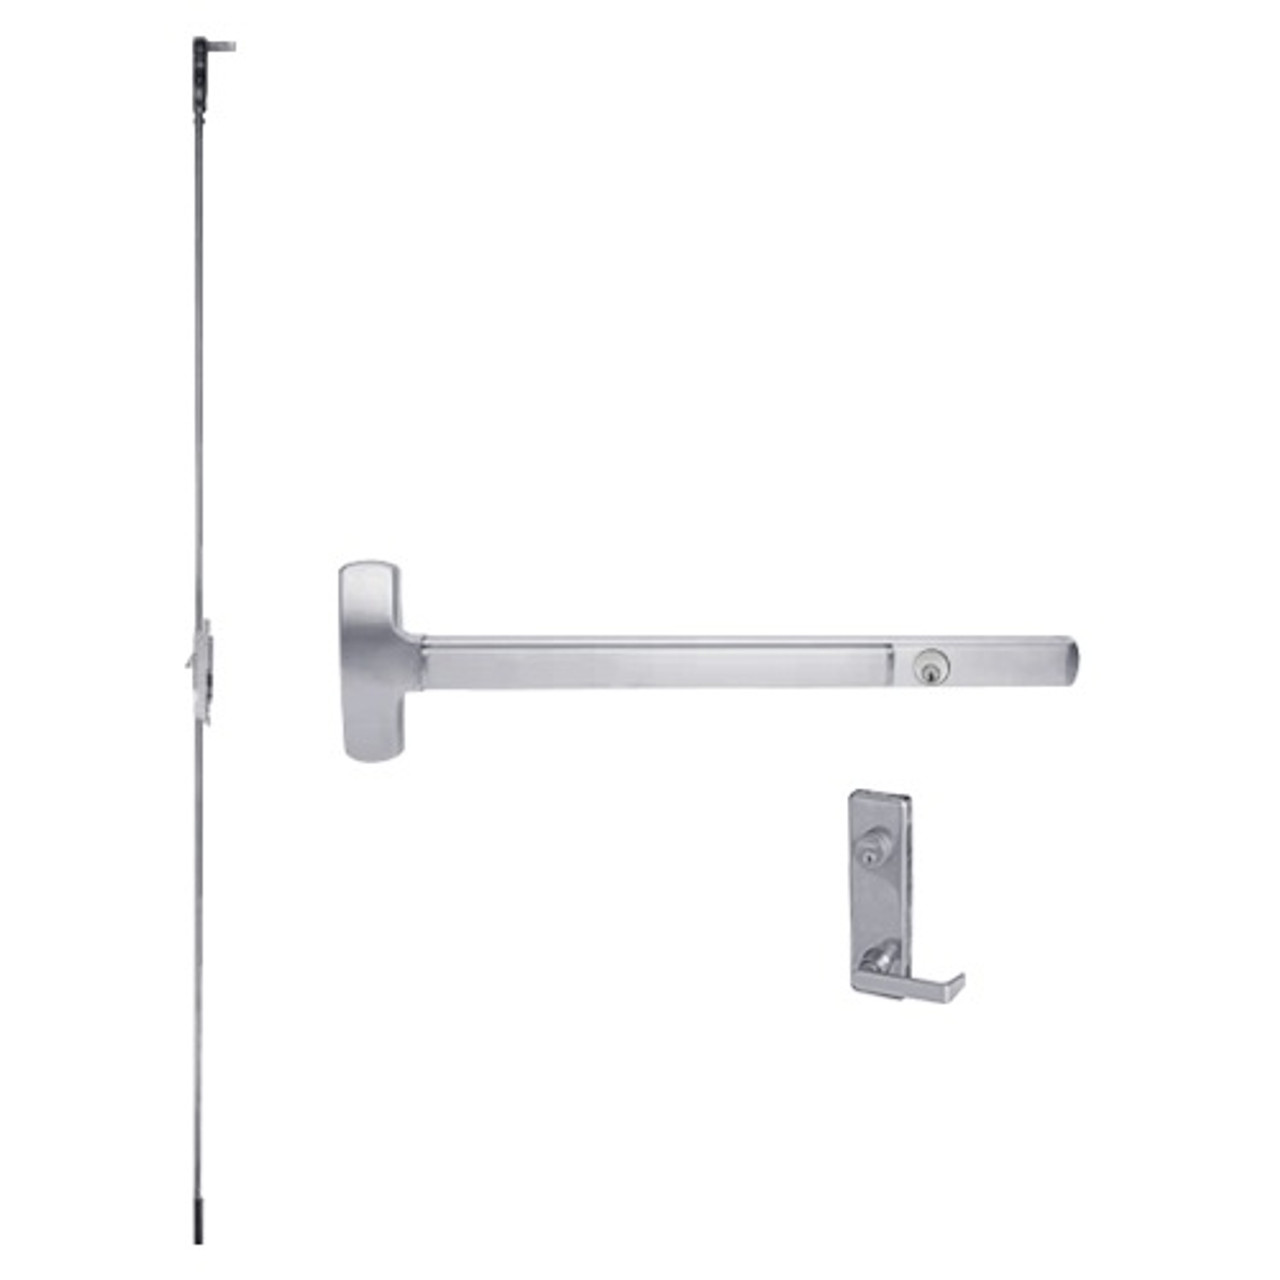 CD25-C-L-DANE-US32-3-LHR Falcon Exit Device in Polished Stainless Steel